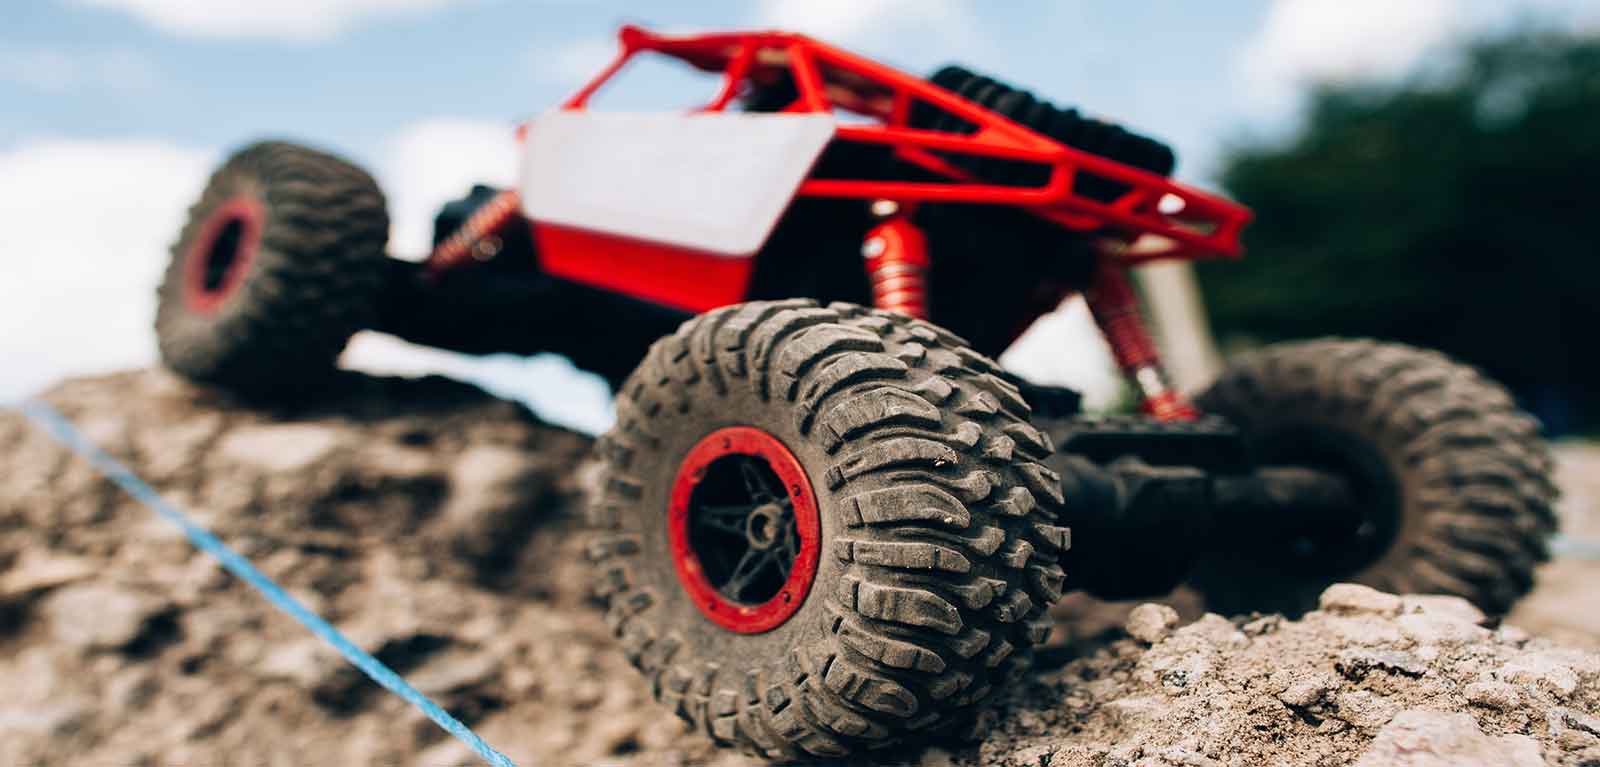 Best RC Rock Crawlers: Reviews and Buyers Guide for 2018 | RC Gear Lab